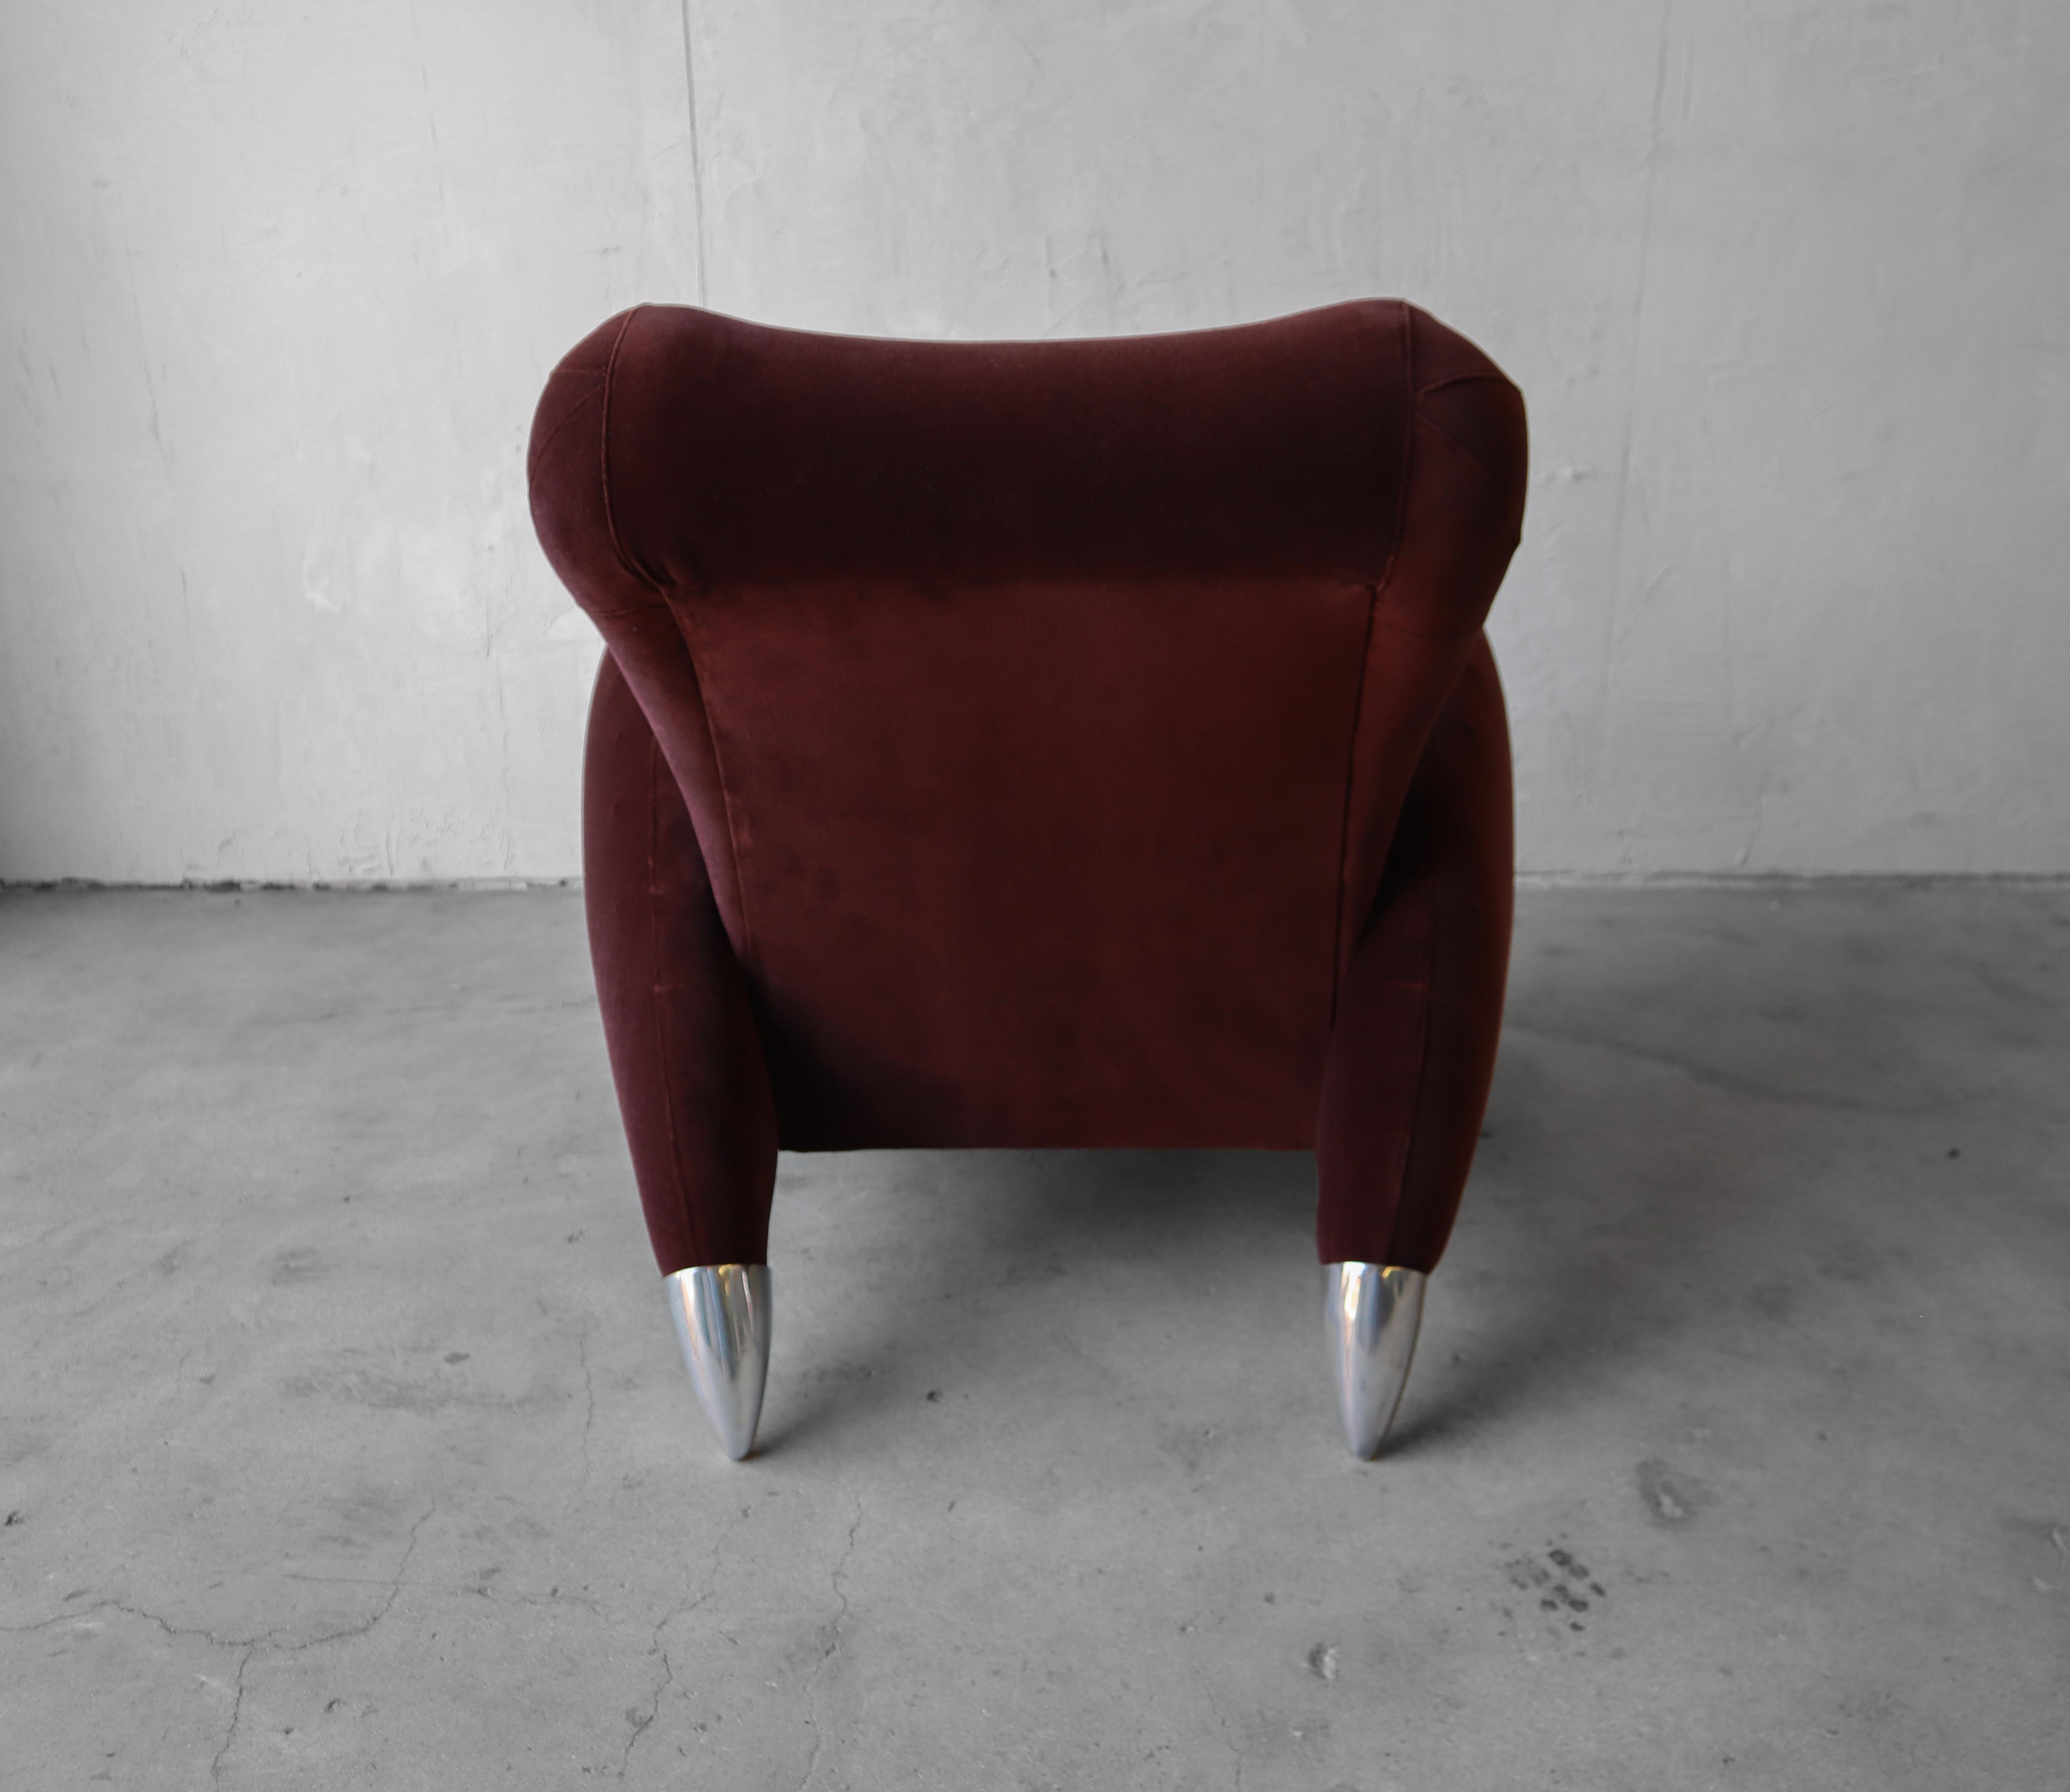 Italian Post Modern Sculptural Lounge Chair For Sale 1